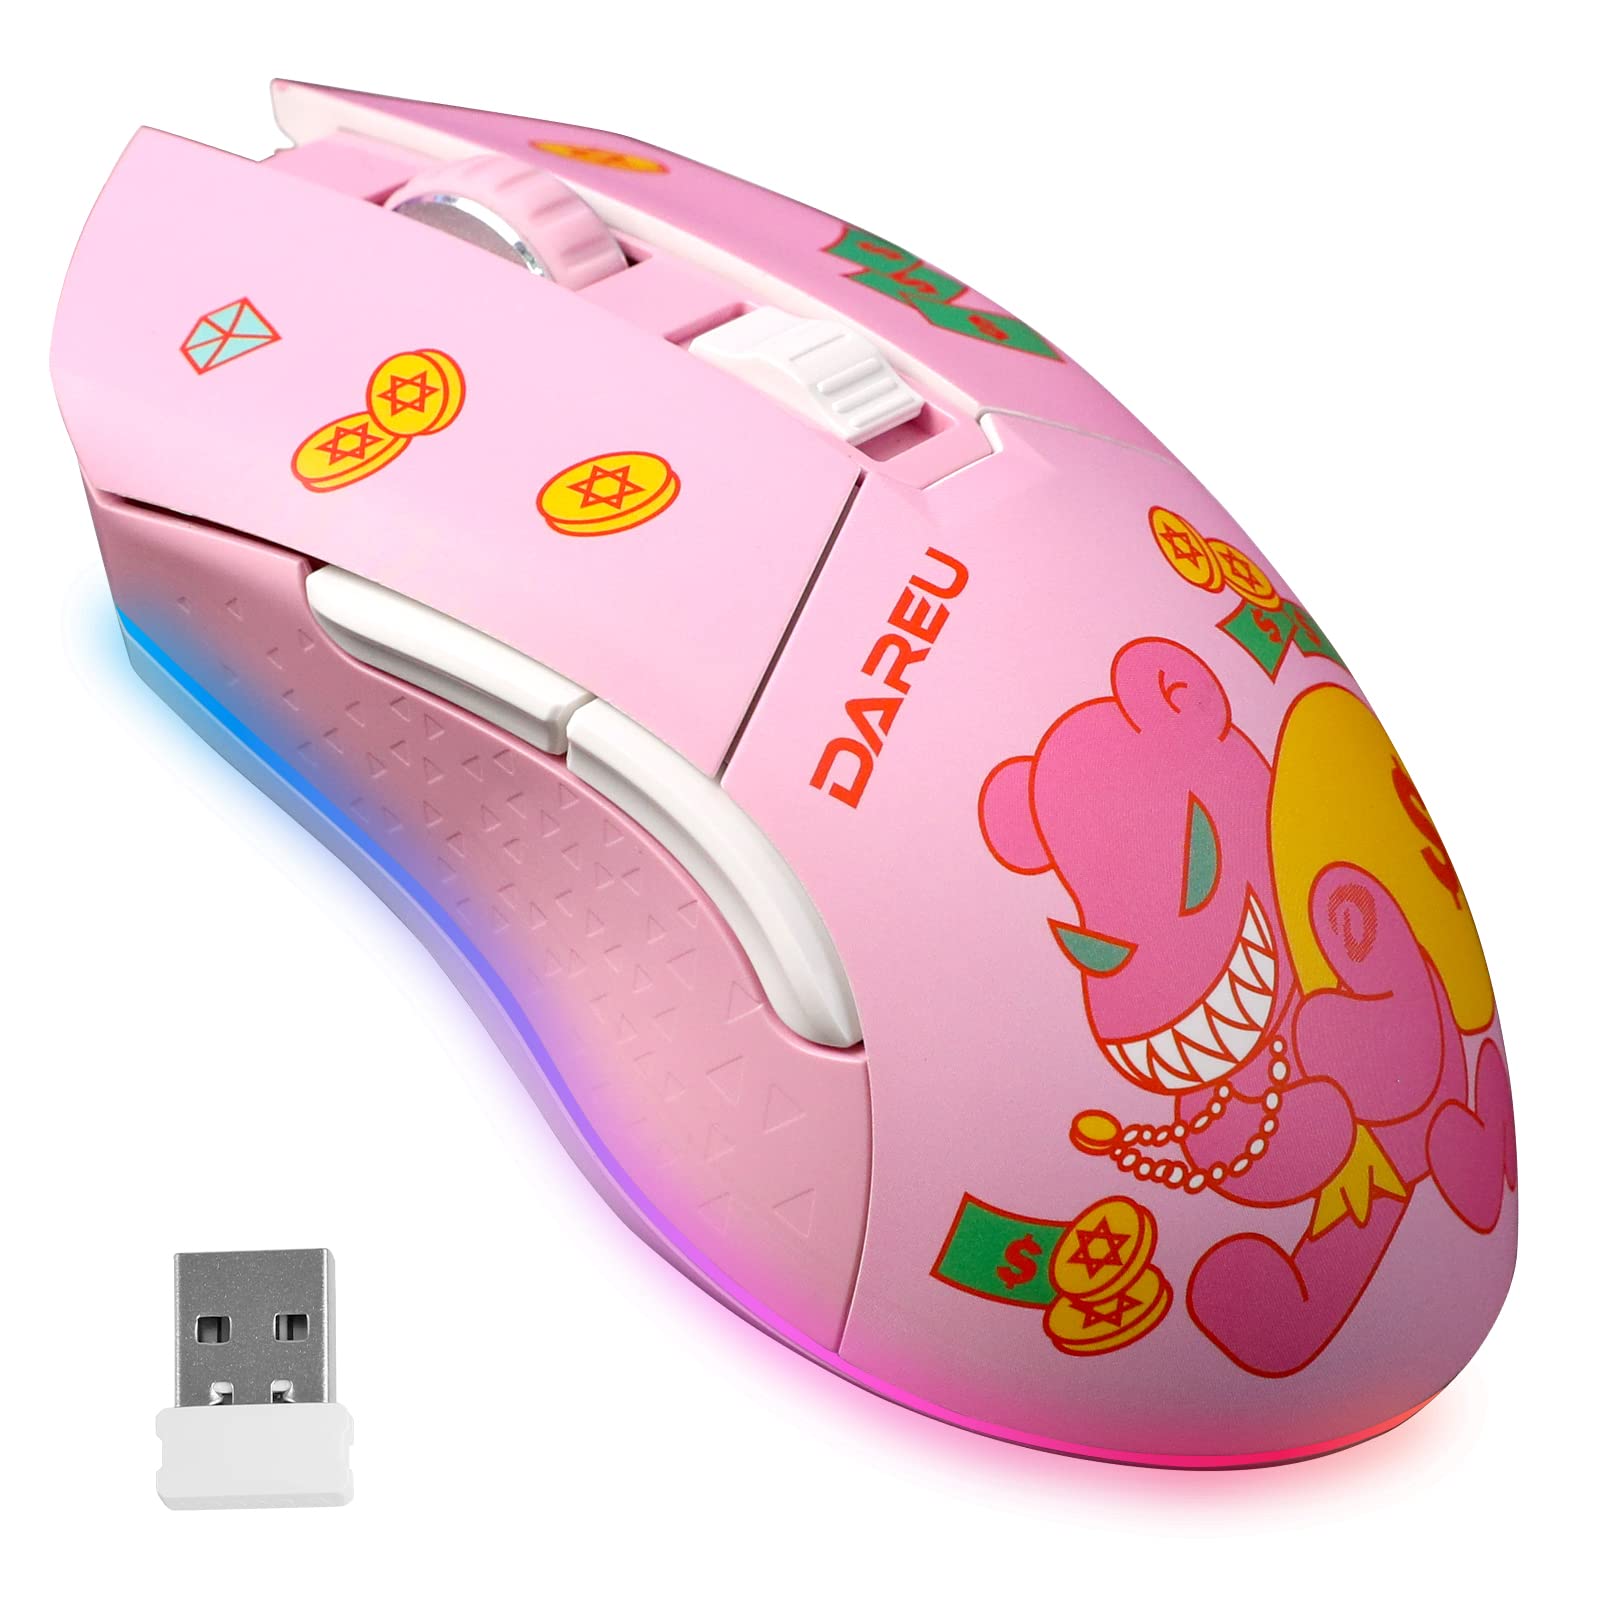 DAREU Pink Wireless Wired Gaming Mouse, Dual-Mode Rechargeable 7 Programmable Buttons,10K DPI,RGB and 7 Adjustable DPI Levels up to [150IPS] [1000Hz] for PC Notebook Mac(Lucky Bear)